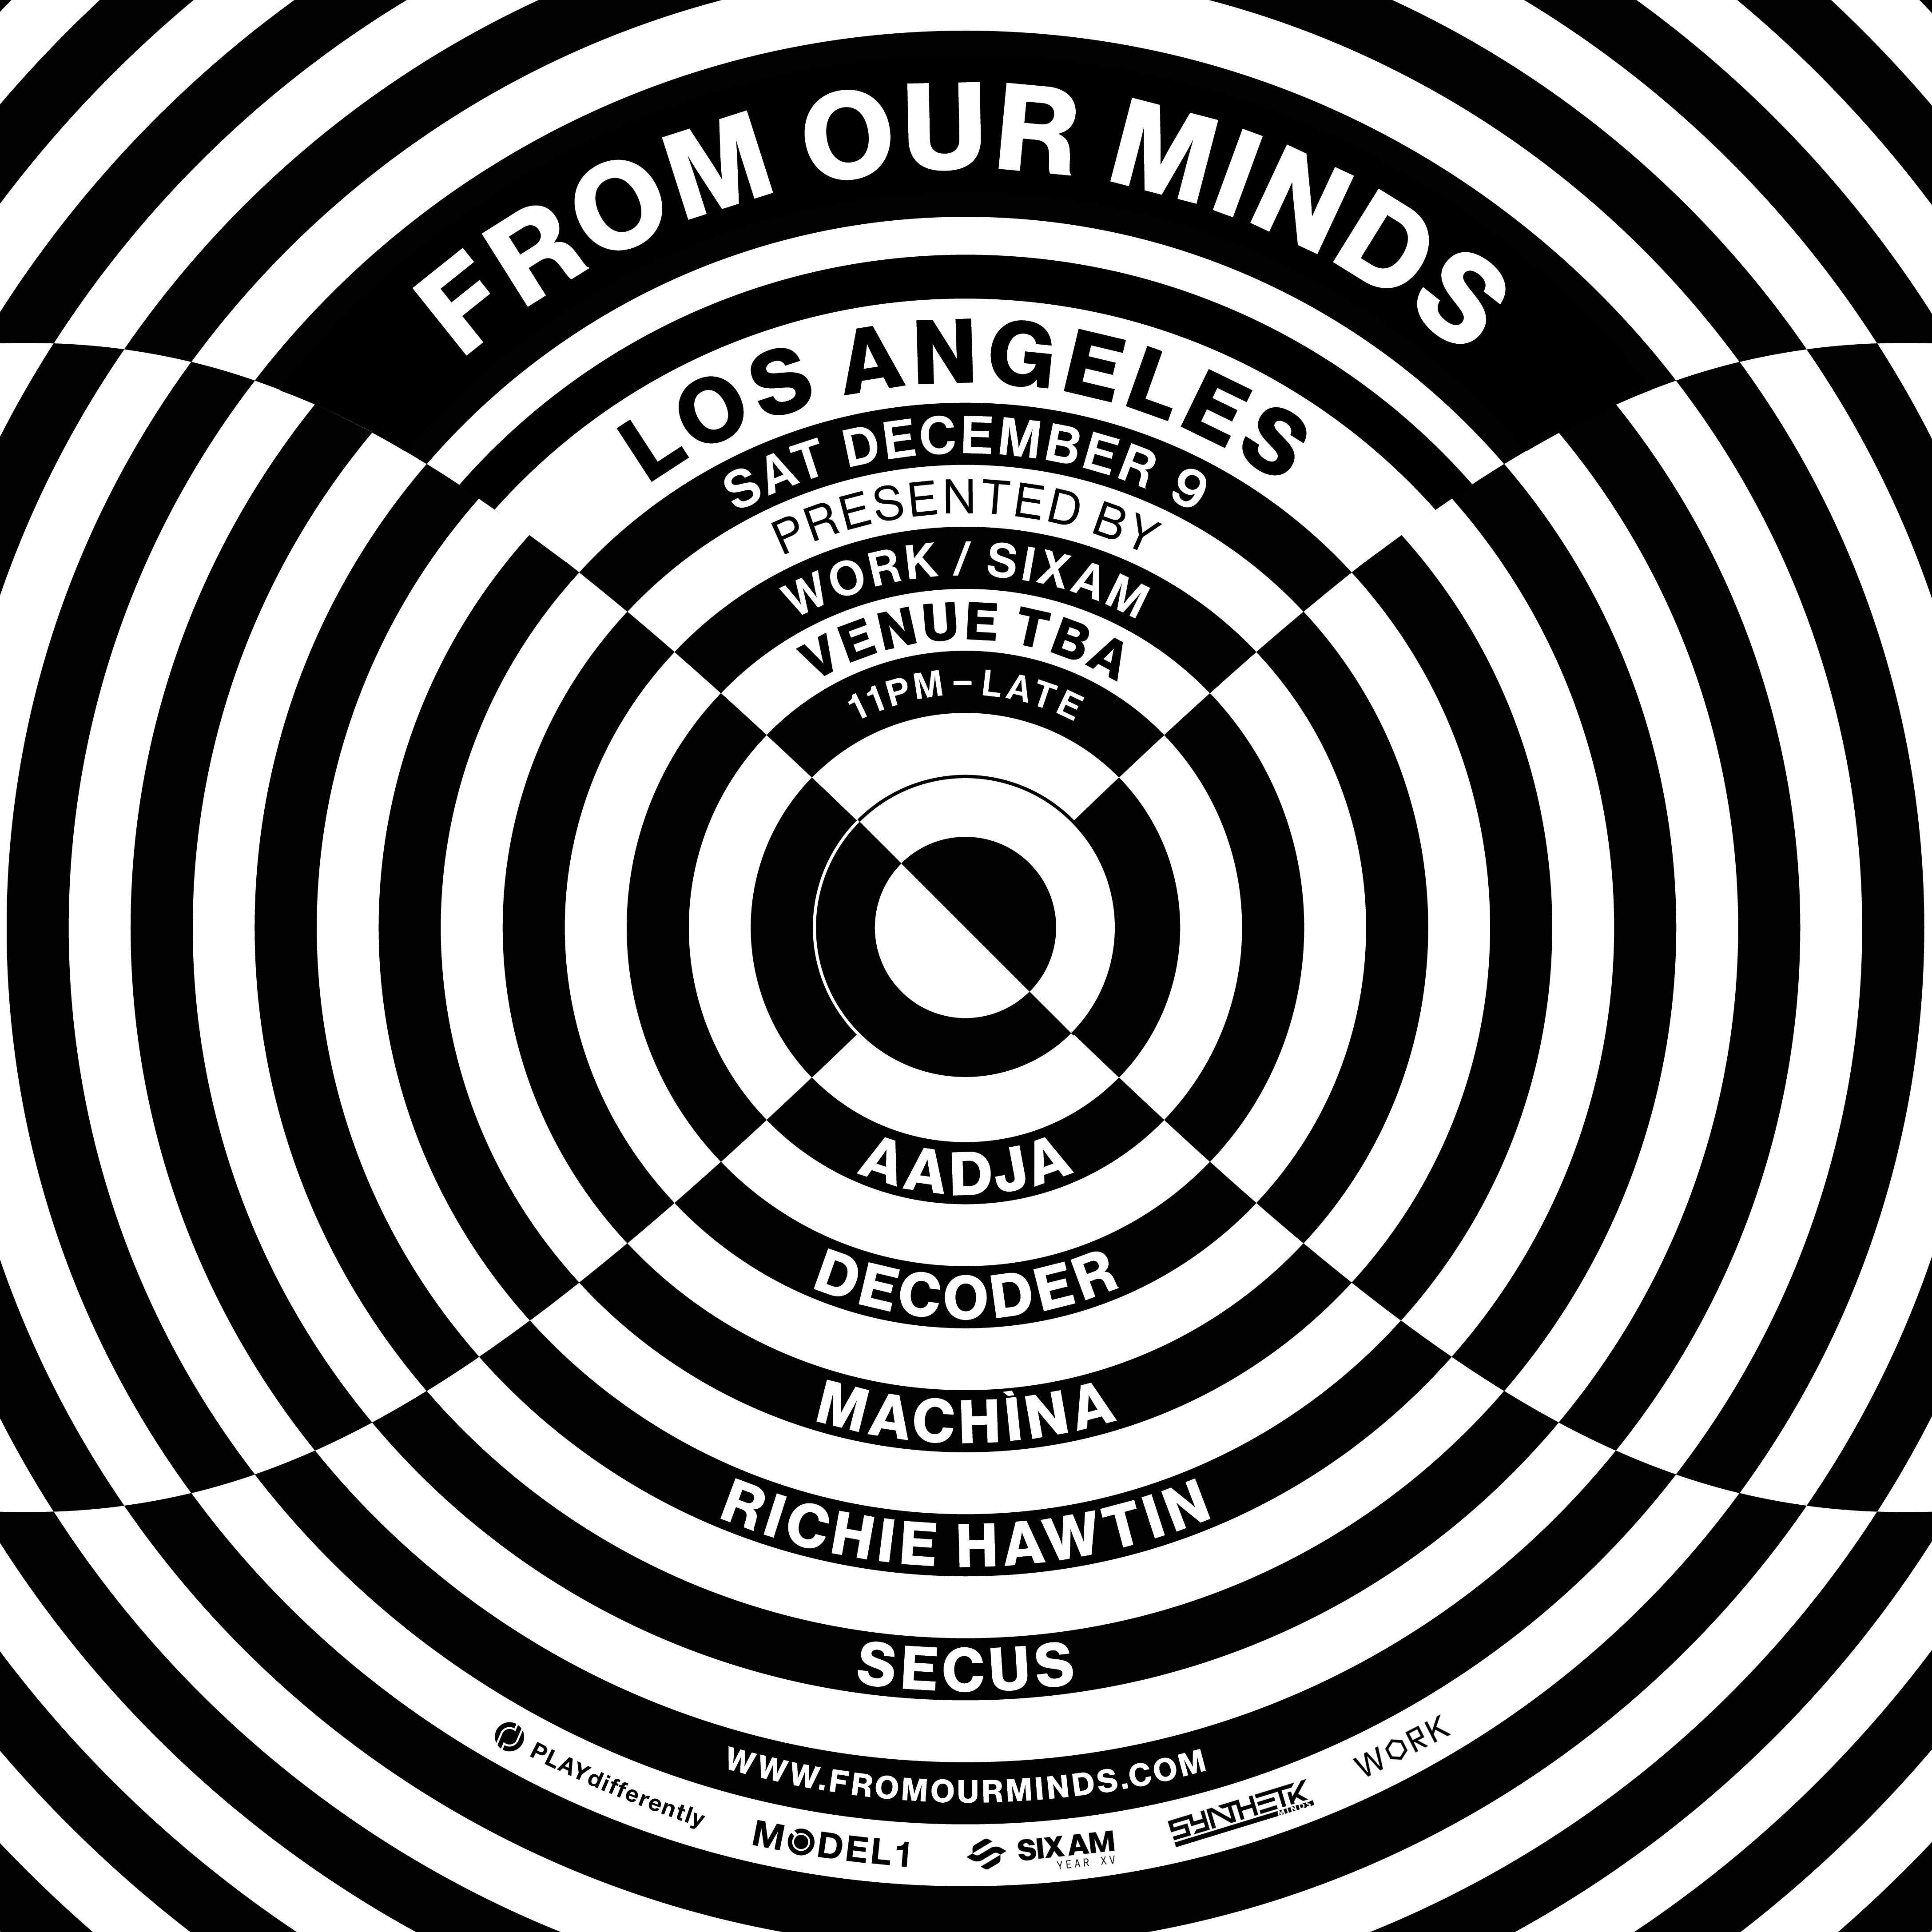 WORK presents: From Our Minds with Richie Hawtin, AADJA, Decoder, Machina & Secus - Página frontal